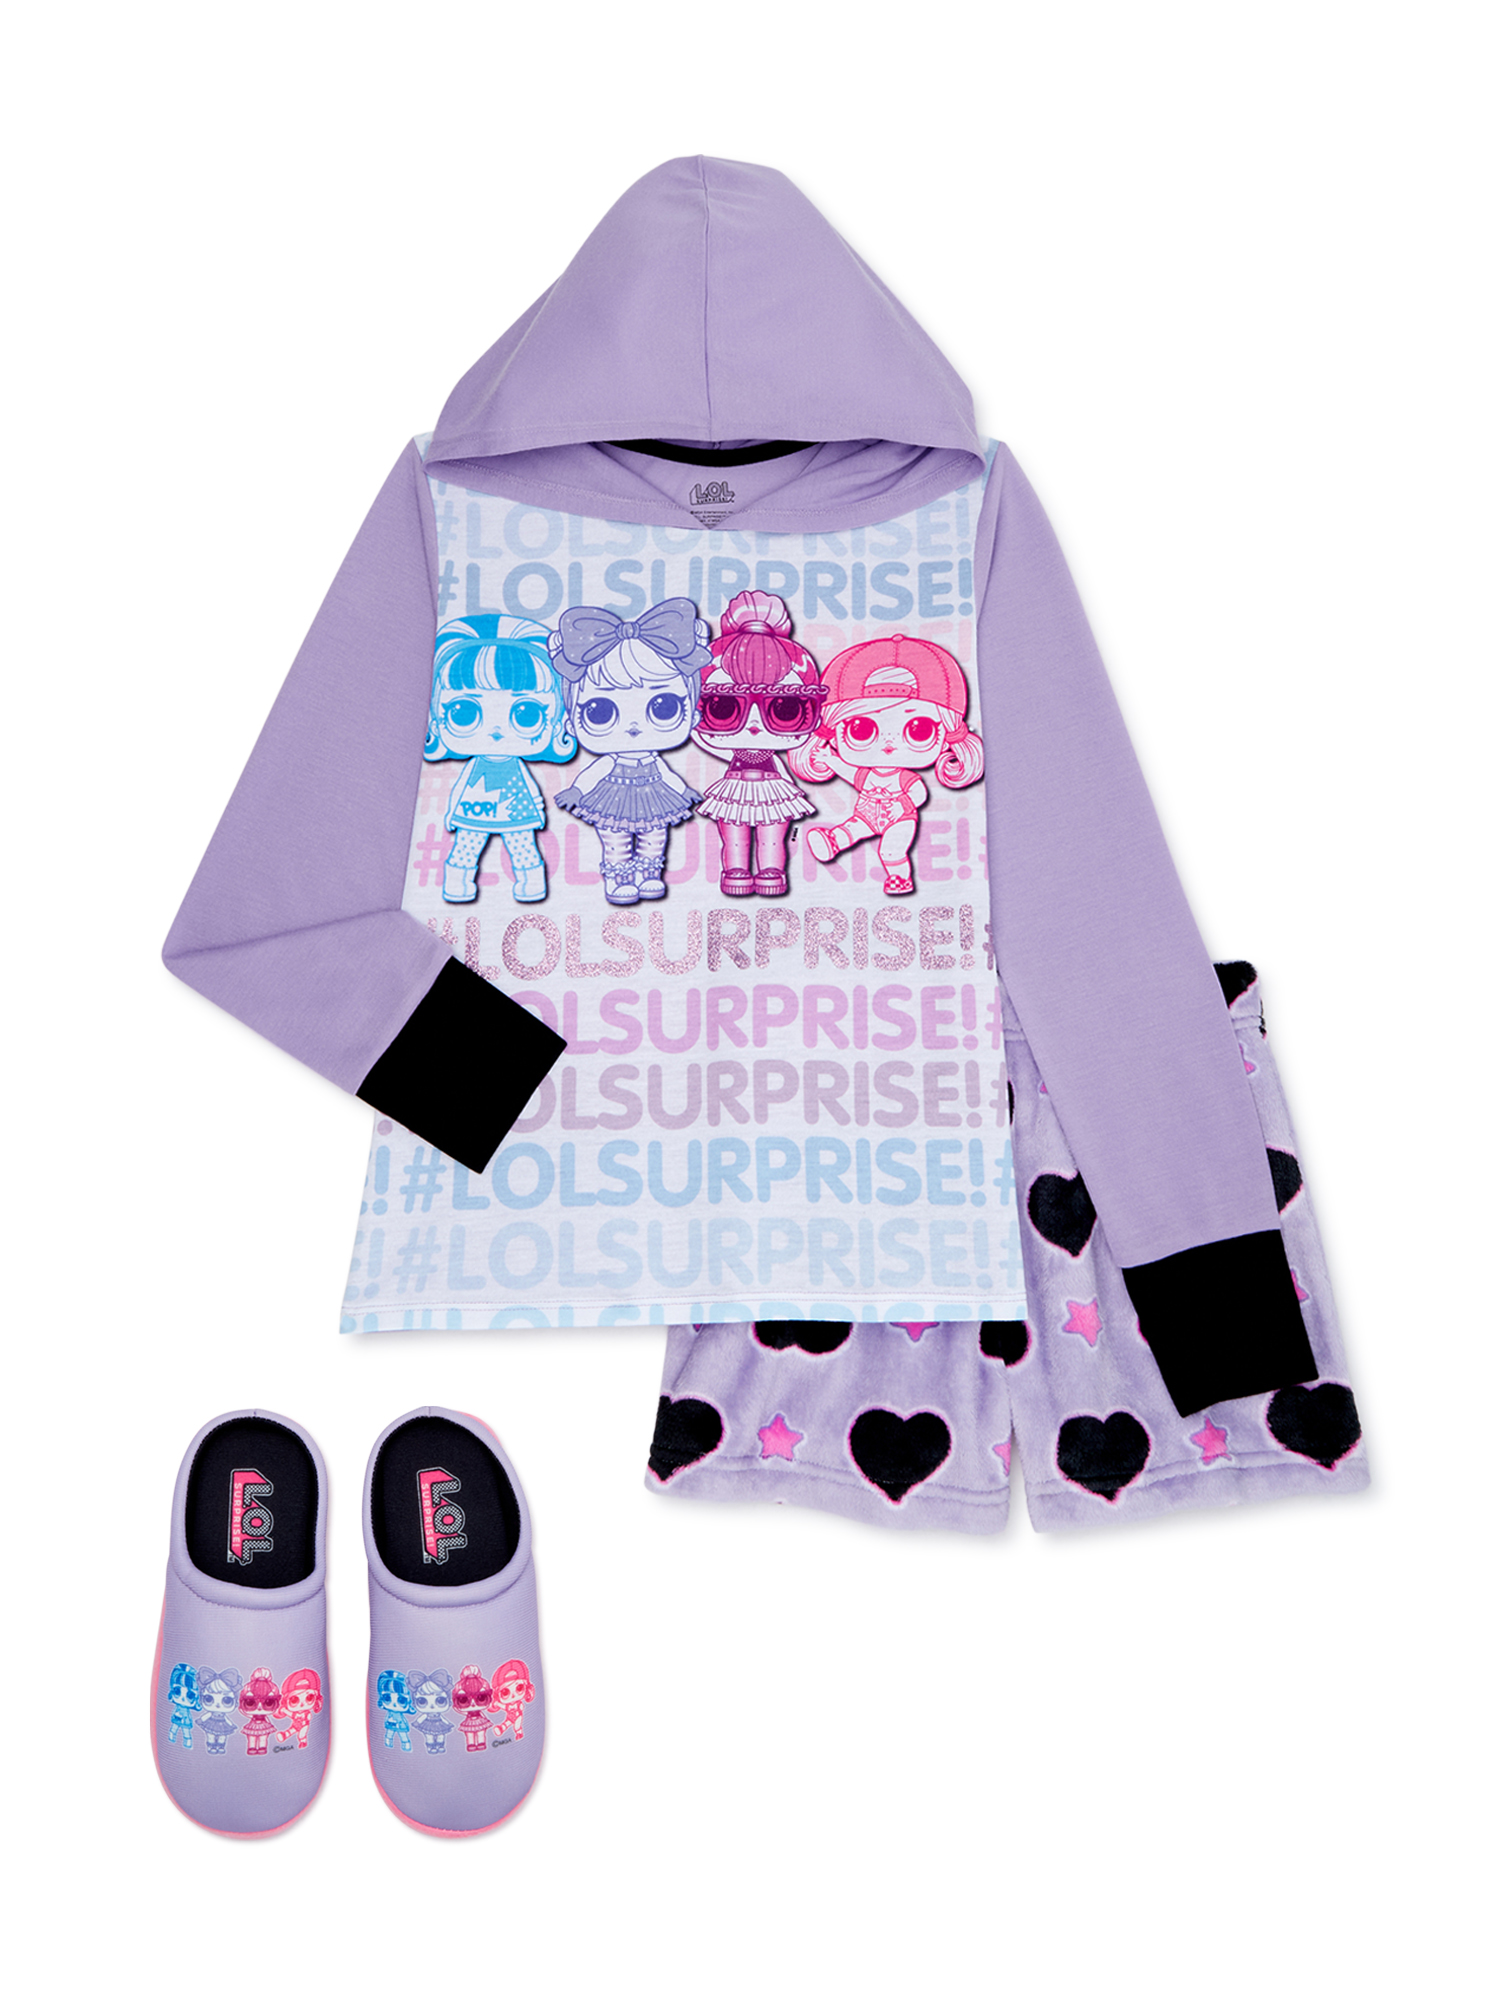 L.O.L Surprise! Girls Pajama with Cozy Plush Shorts & Slippers, Sizes 4-12 - image 1 of 3